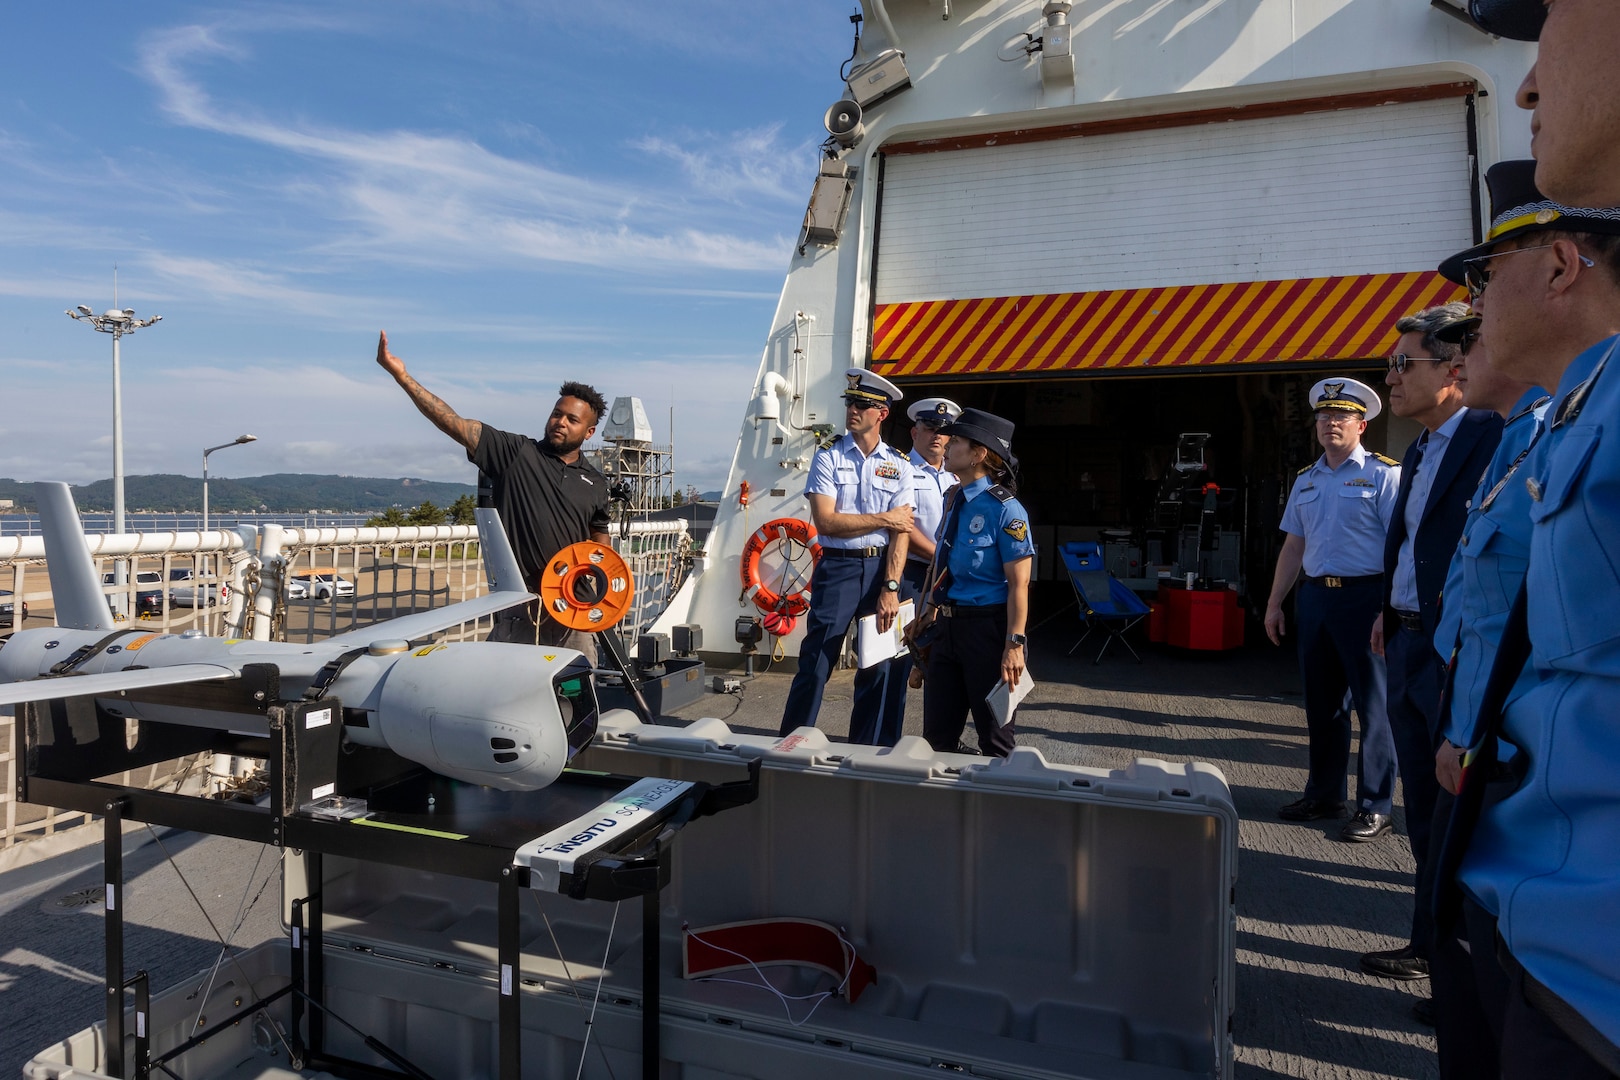 Christopher Lee, an operator of the ScanEagle small unmanned aerial system (UAS), working aboard the U.S. Coast Guard Cutter Waesche (WMSL-751), explains the role of UAS to leaders in the Korea Coast Guard, during a tour of the Waesche in Pohang, Republic of Korea, June 9, 2024. U.S. Coast Guardsmen welcomed leaders from the Korea Coast Guard and the mayor of Pohang aboard for a tour to highlight capabilities and best practices used by the U.S. Coast Guard. Waesche is assigned to Destroyer Squadron (DESRON) 15, the Navy’s largest DESRON and the U.S. 7th Fleet’s principal surface force. U.S. Coast Guard missions in the Indo-Pacific focus on issues directly supporting and advancing our regional partners’ efforts to protect fish stocks, ensure safety of life at sea, support environmental response, and provide disaster relief. (U.S. Marine Corps photo by Cpl. Elijah Murphy)